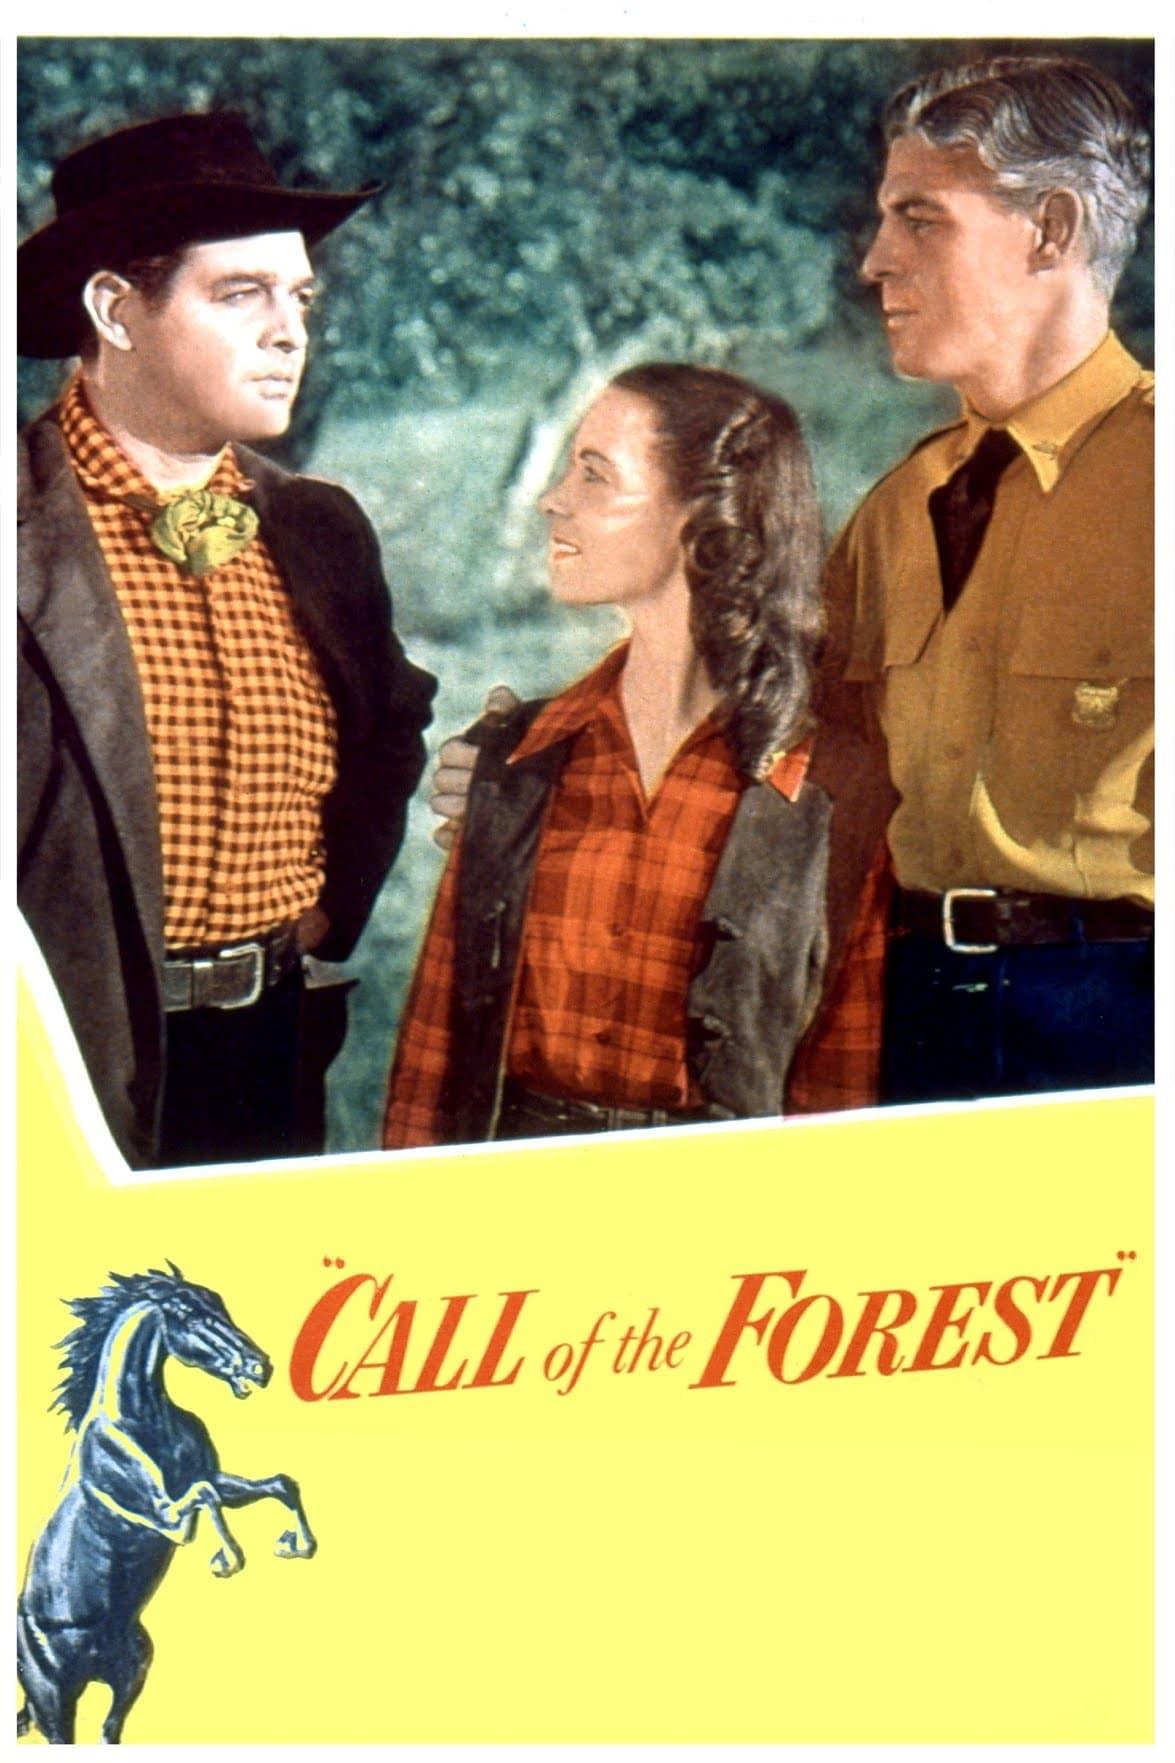 Call of the Forest poster